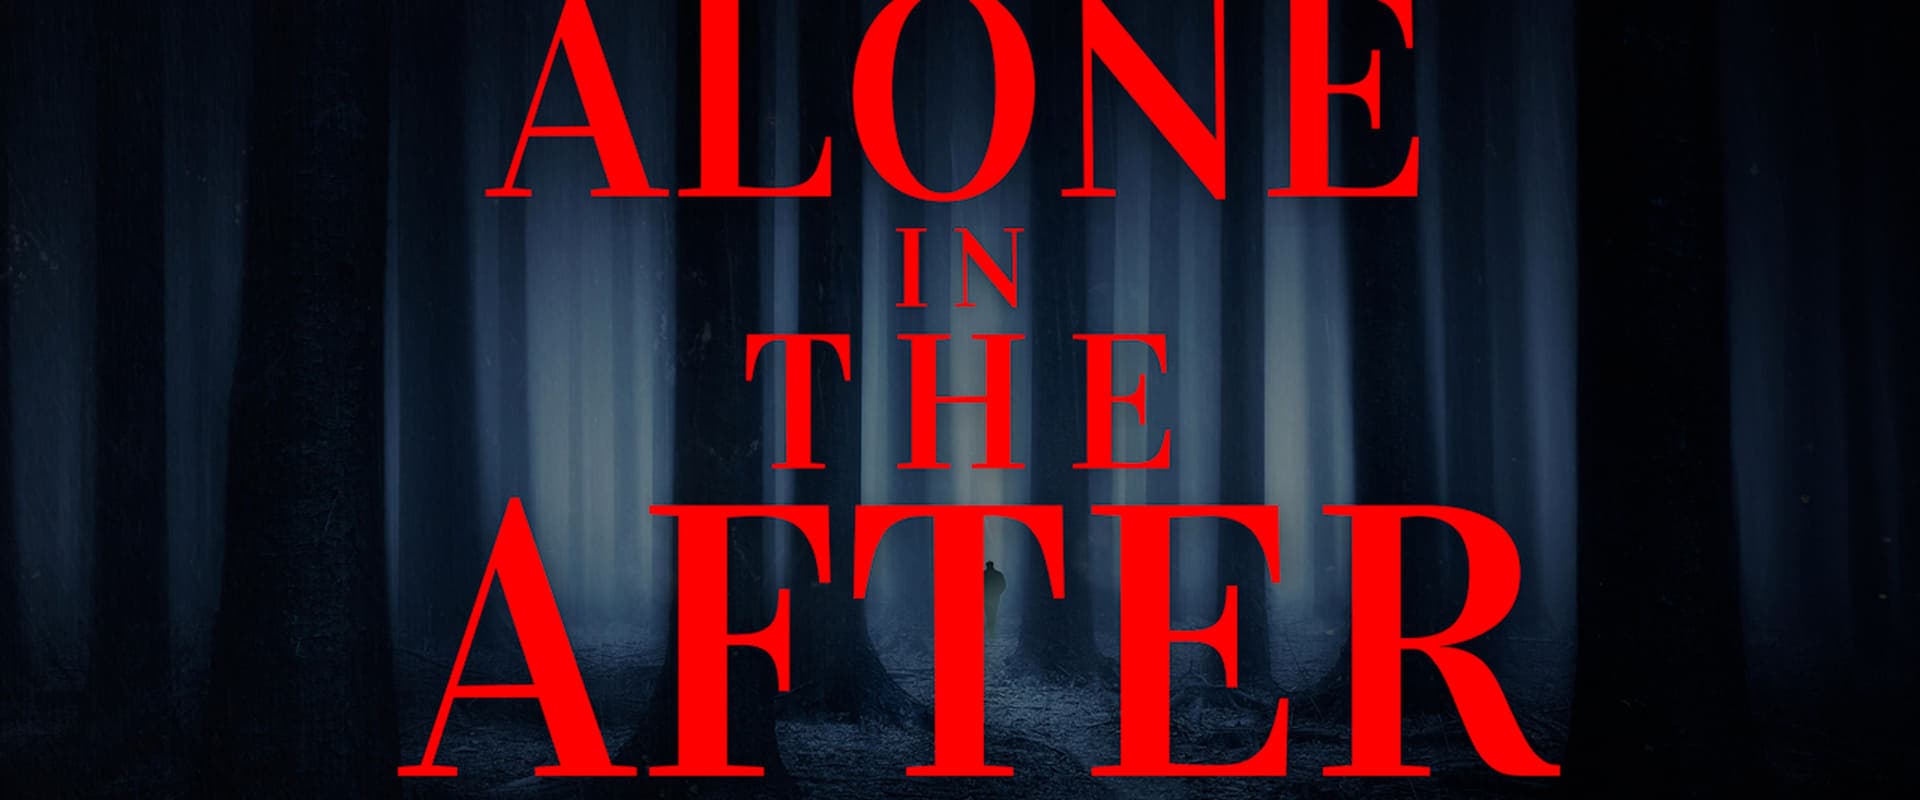 Alone in The After